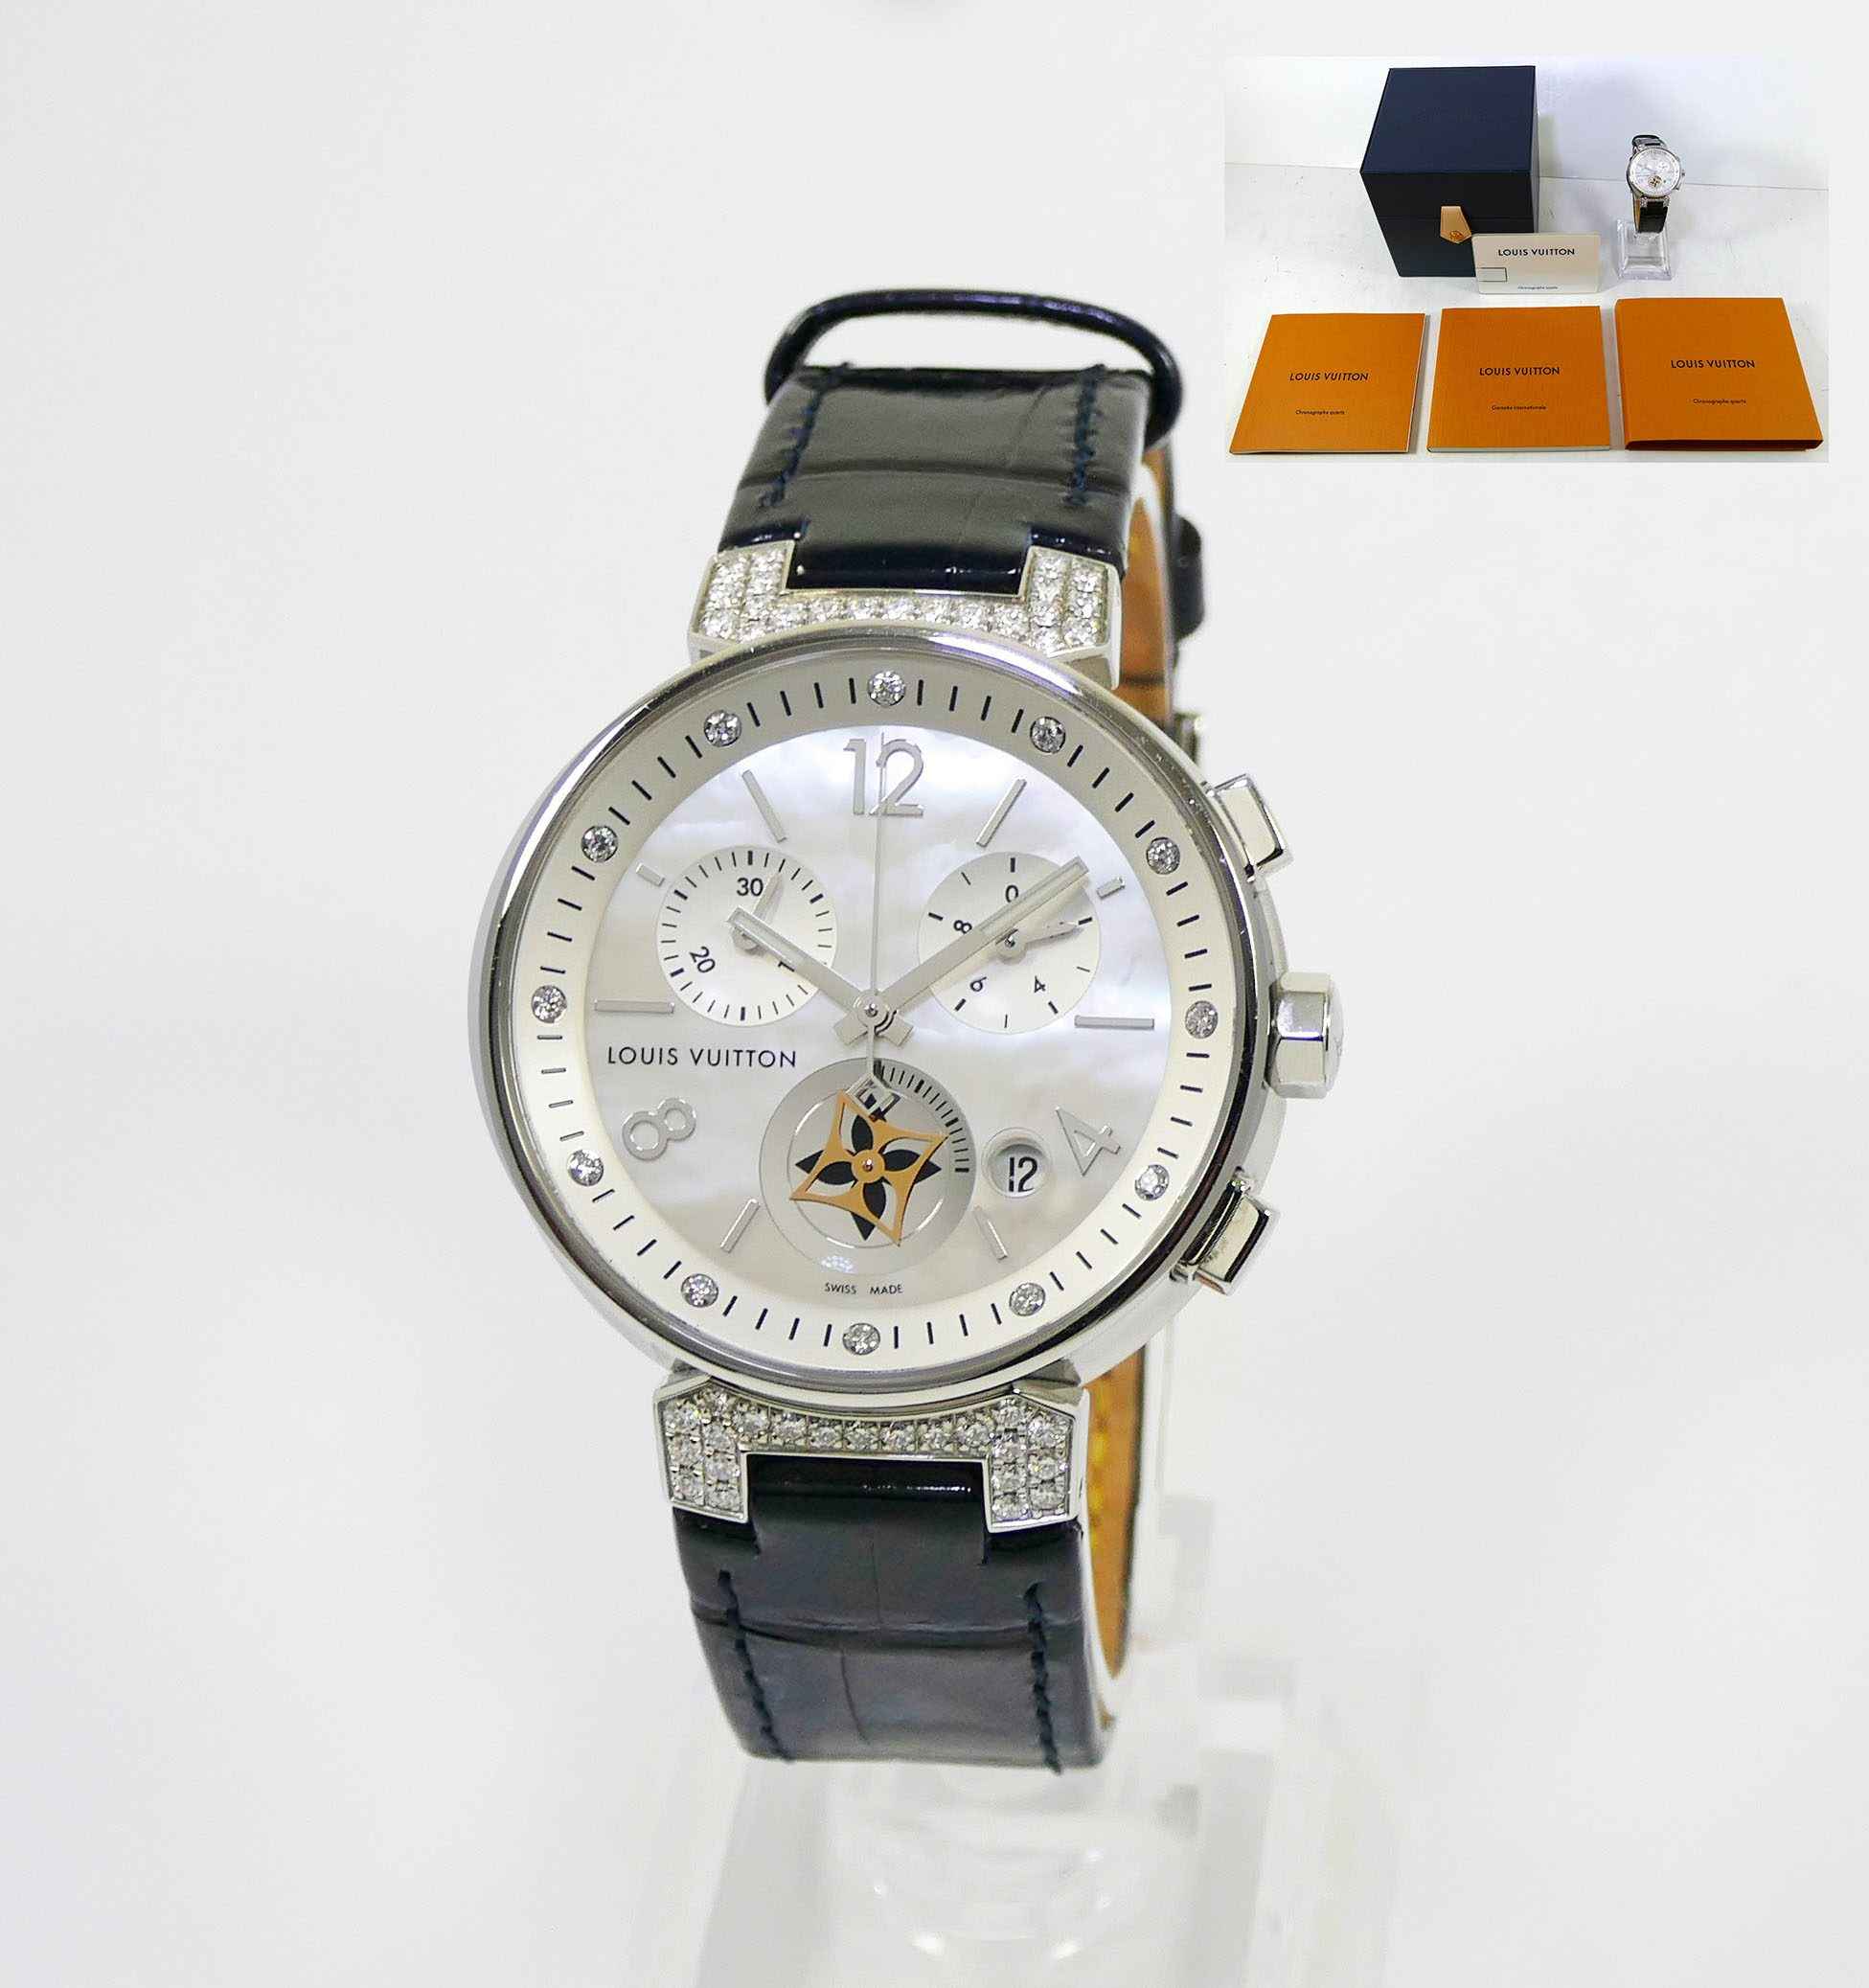 Louis Vuitton Tambour Chronograph for $2,700 for sale from a